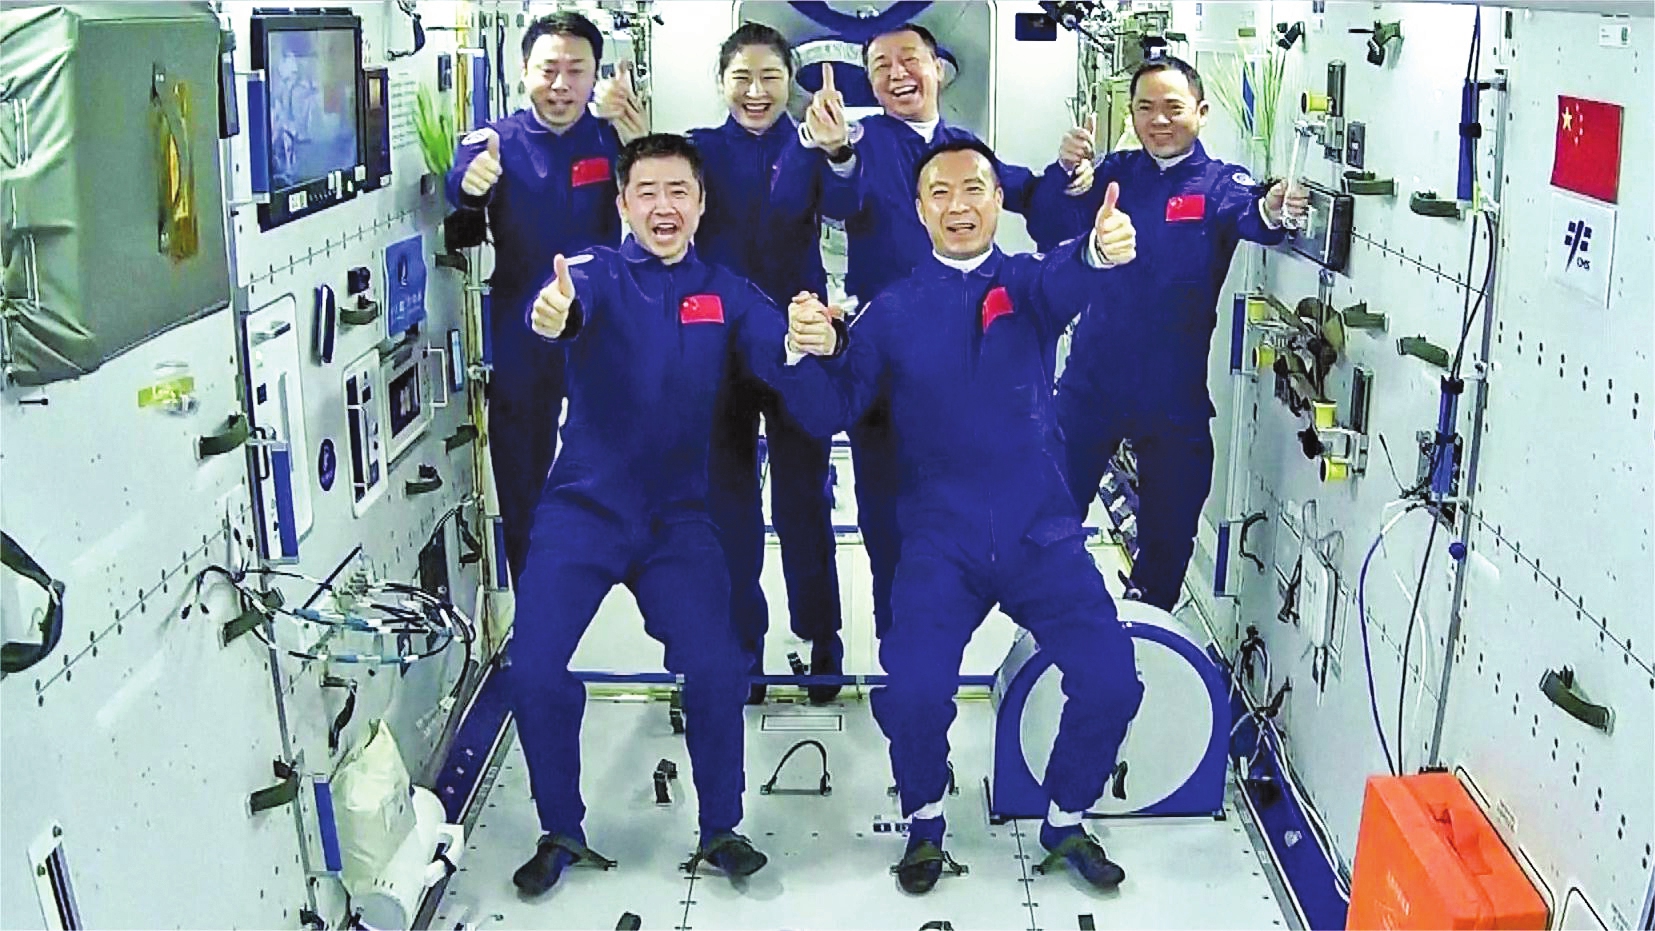 The crew members of Shenzhou-14 and Shanzhou-15 meet and take a photo together in China's space station on November 30. Photo: VCG